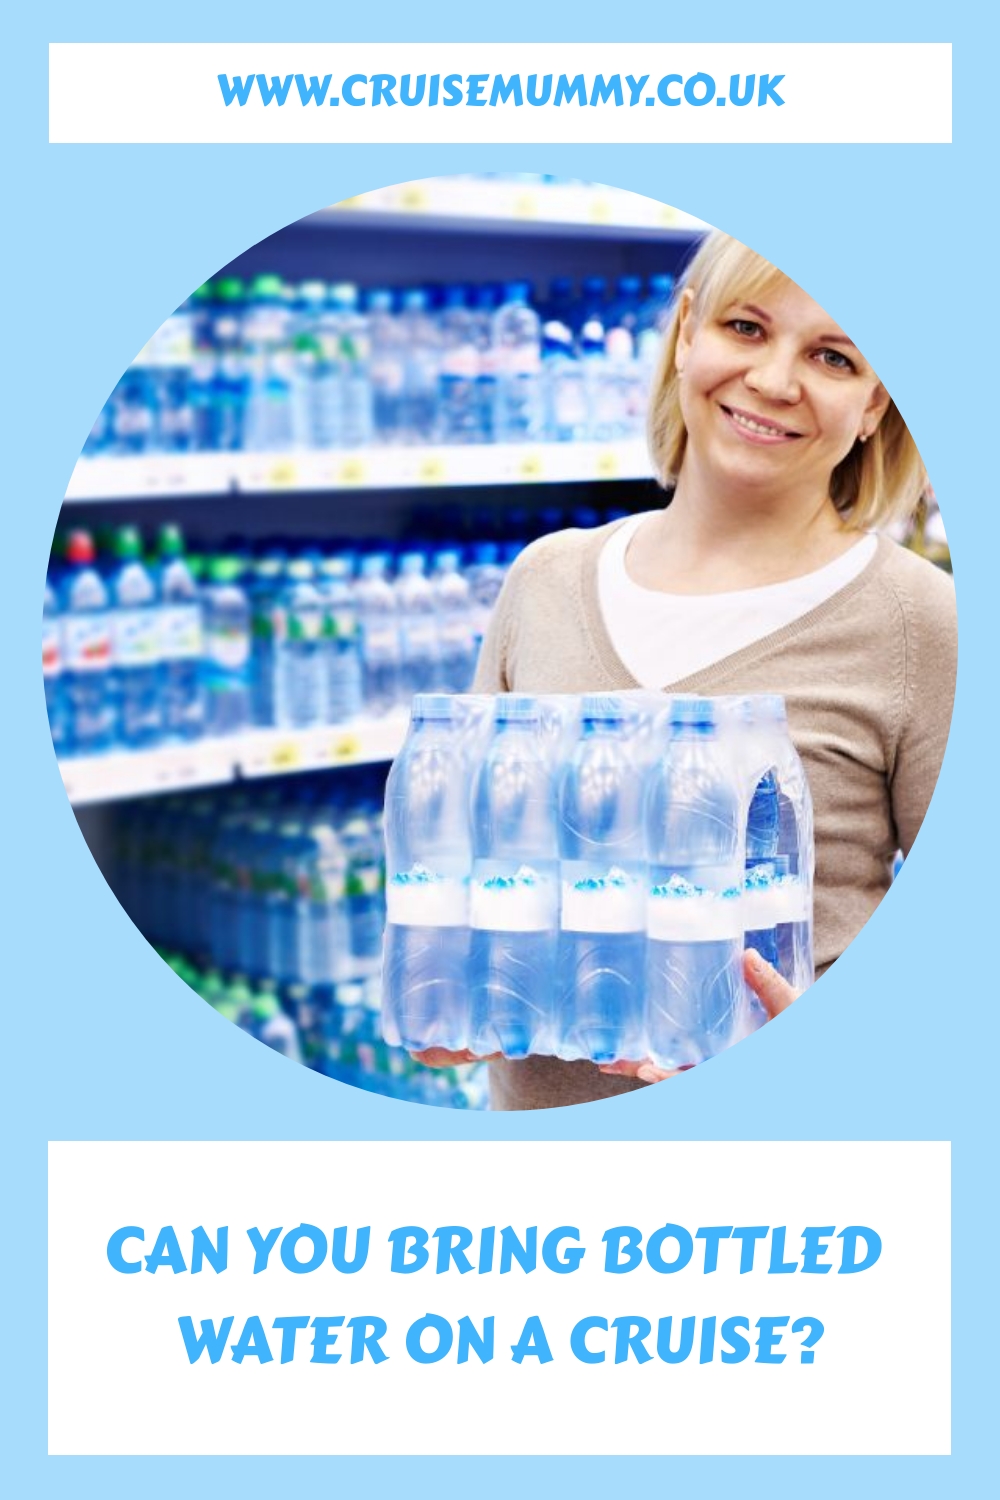 Can You Bring Bottled Water On A Cruise?